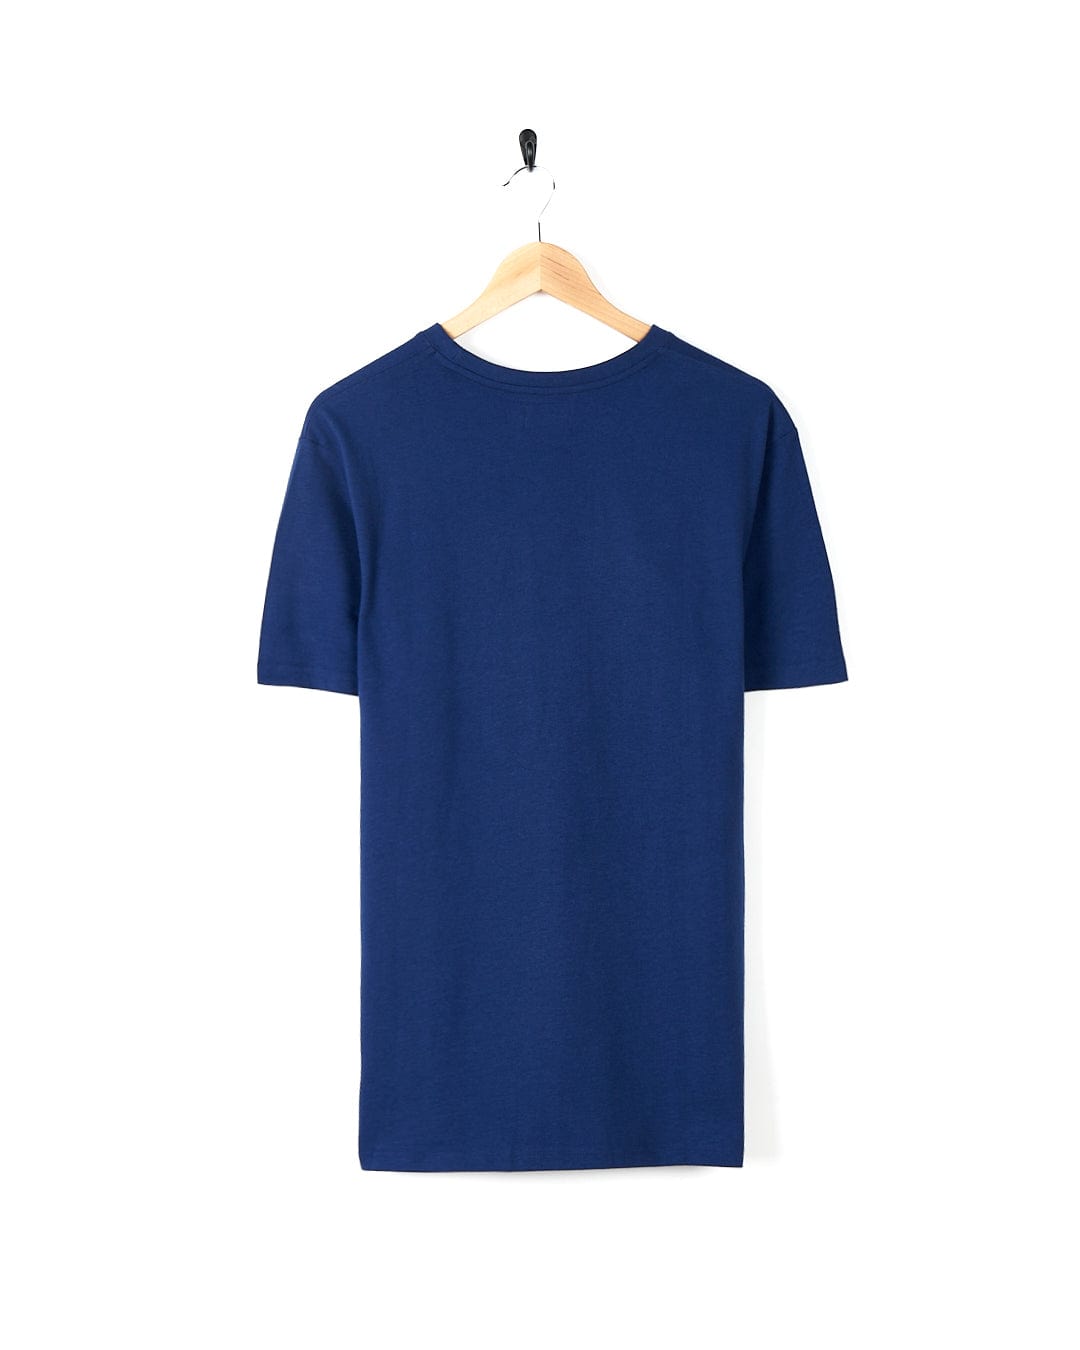 A "Snowboards - Mens Short Sleeve T-Shirt - Blue" made of cotton hanging on a hanger.